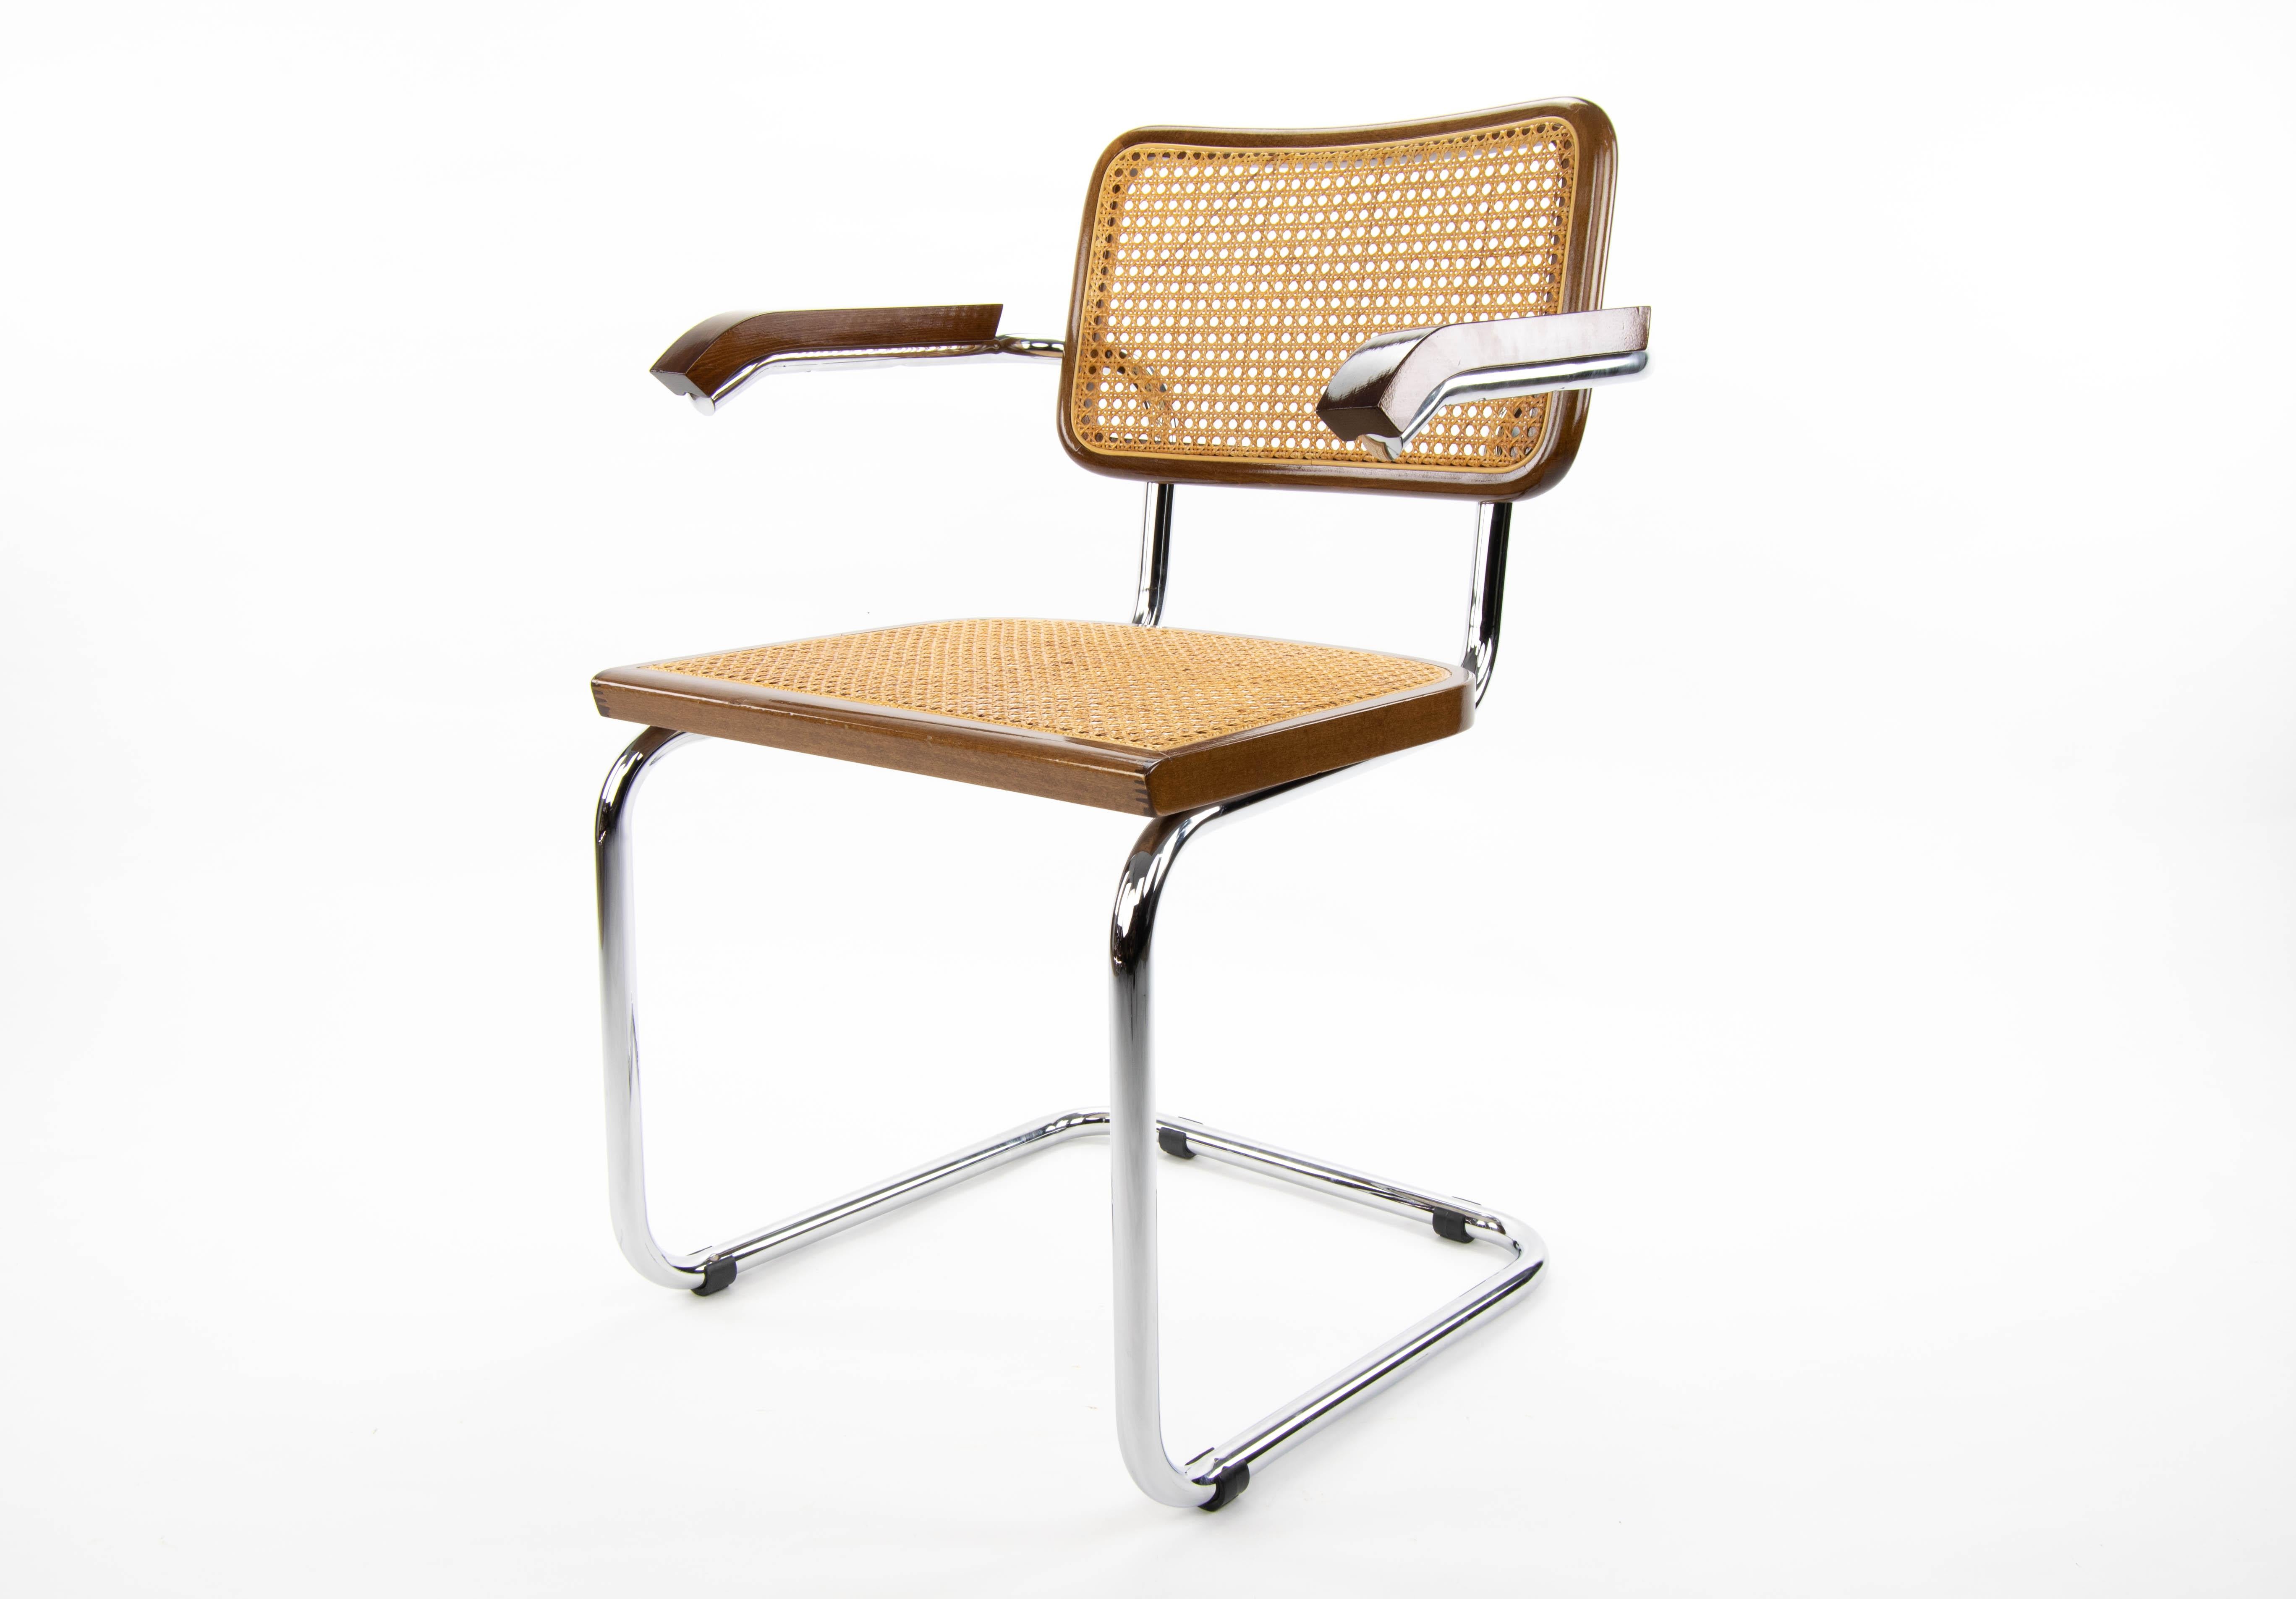 Steel Mid-Century Modern Chrome and Walnut Chairs by Marcel Breuer, Italy, 1970s